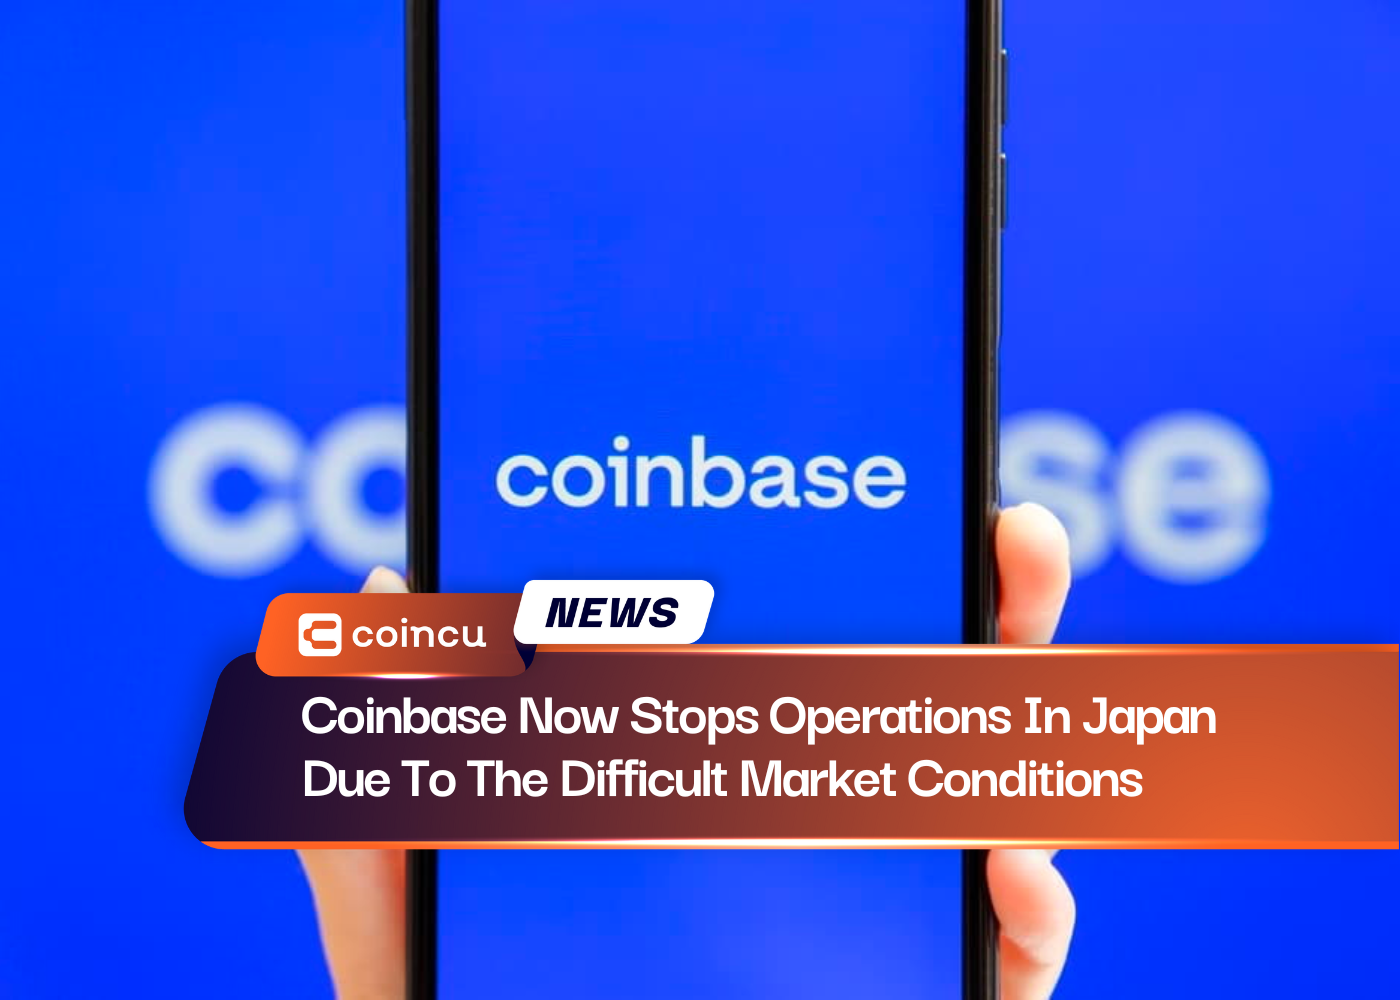 Coinbase Now Stops Operations In Japan Due To The Difficult Market Conditions